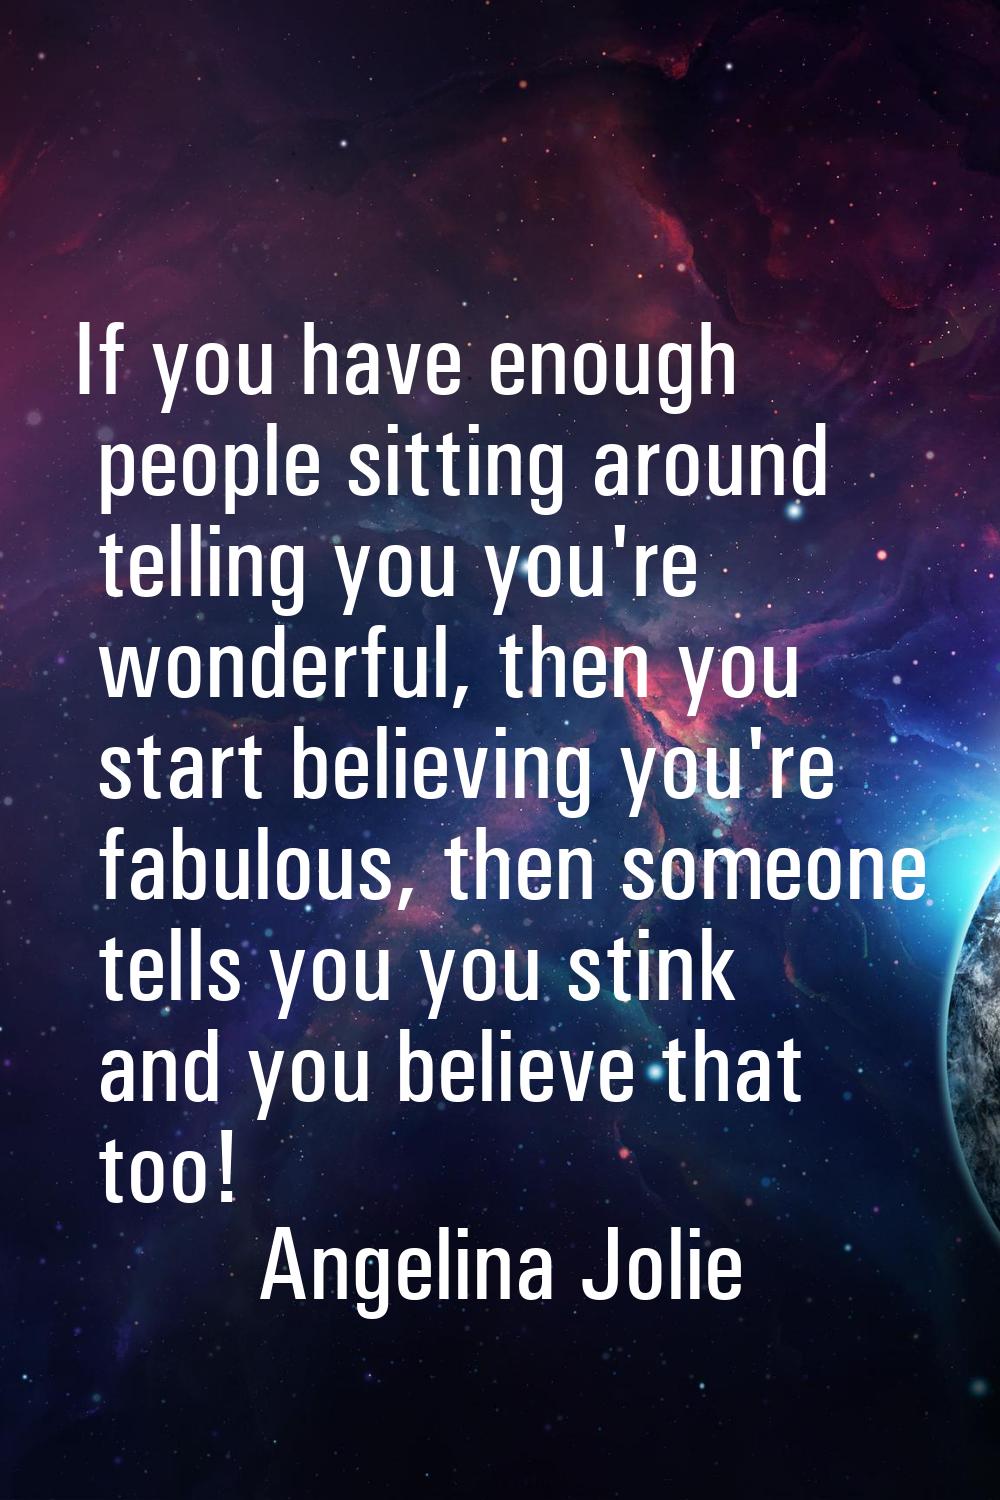 If you have enough people sitting around telling you you're wonderful, then you start believing you